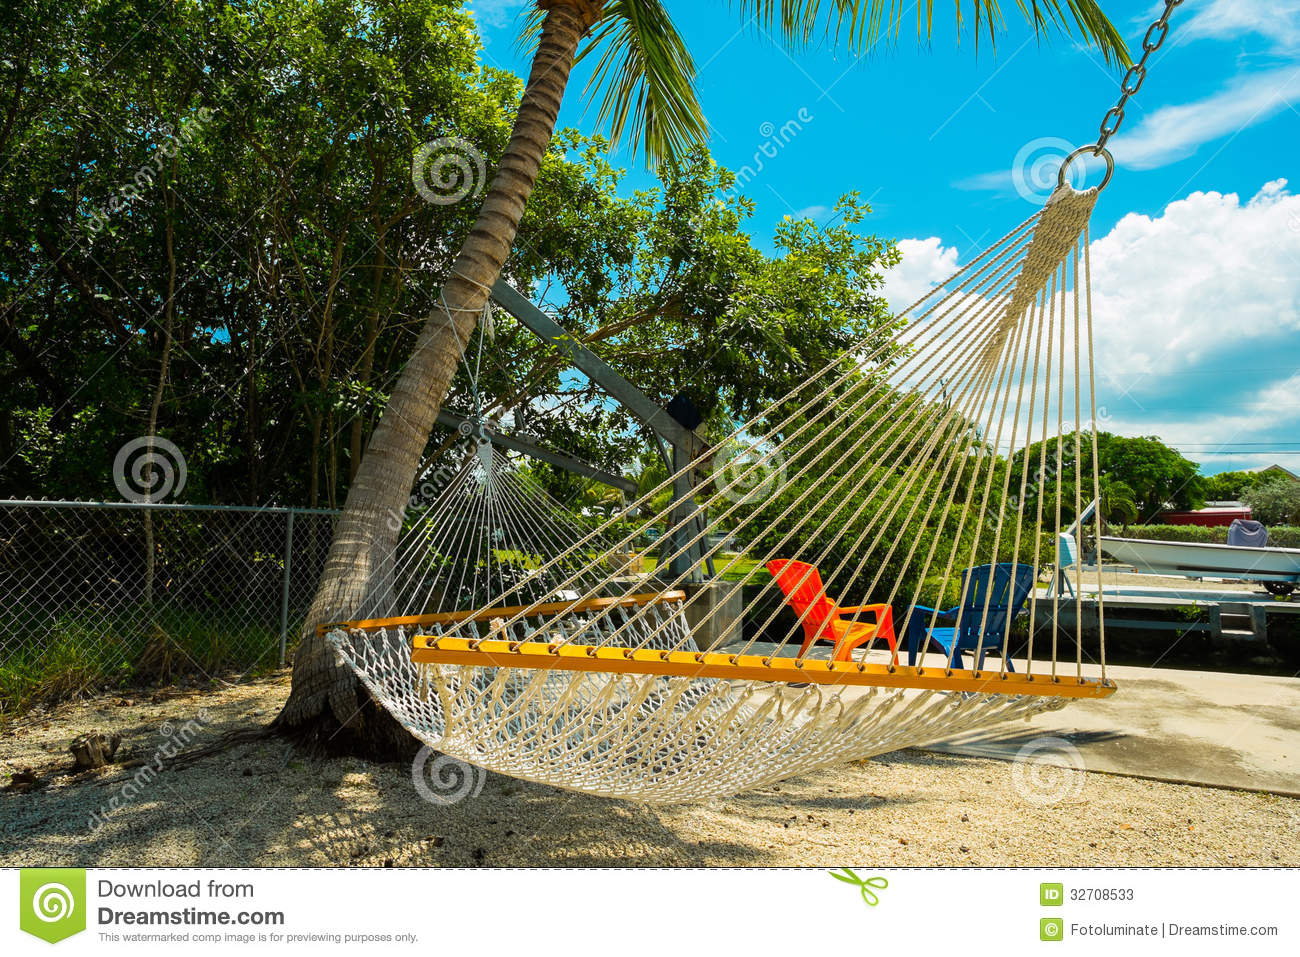 Hammock Hanging From A Palm Tree In The Backyard Of A Florida Keys